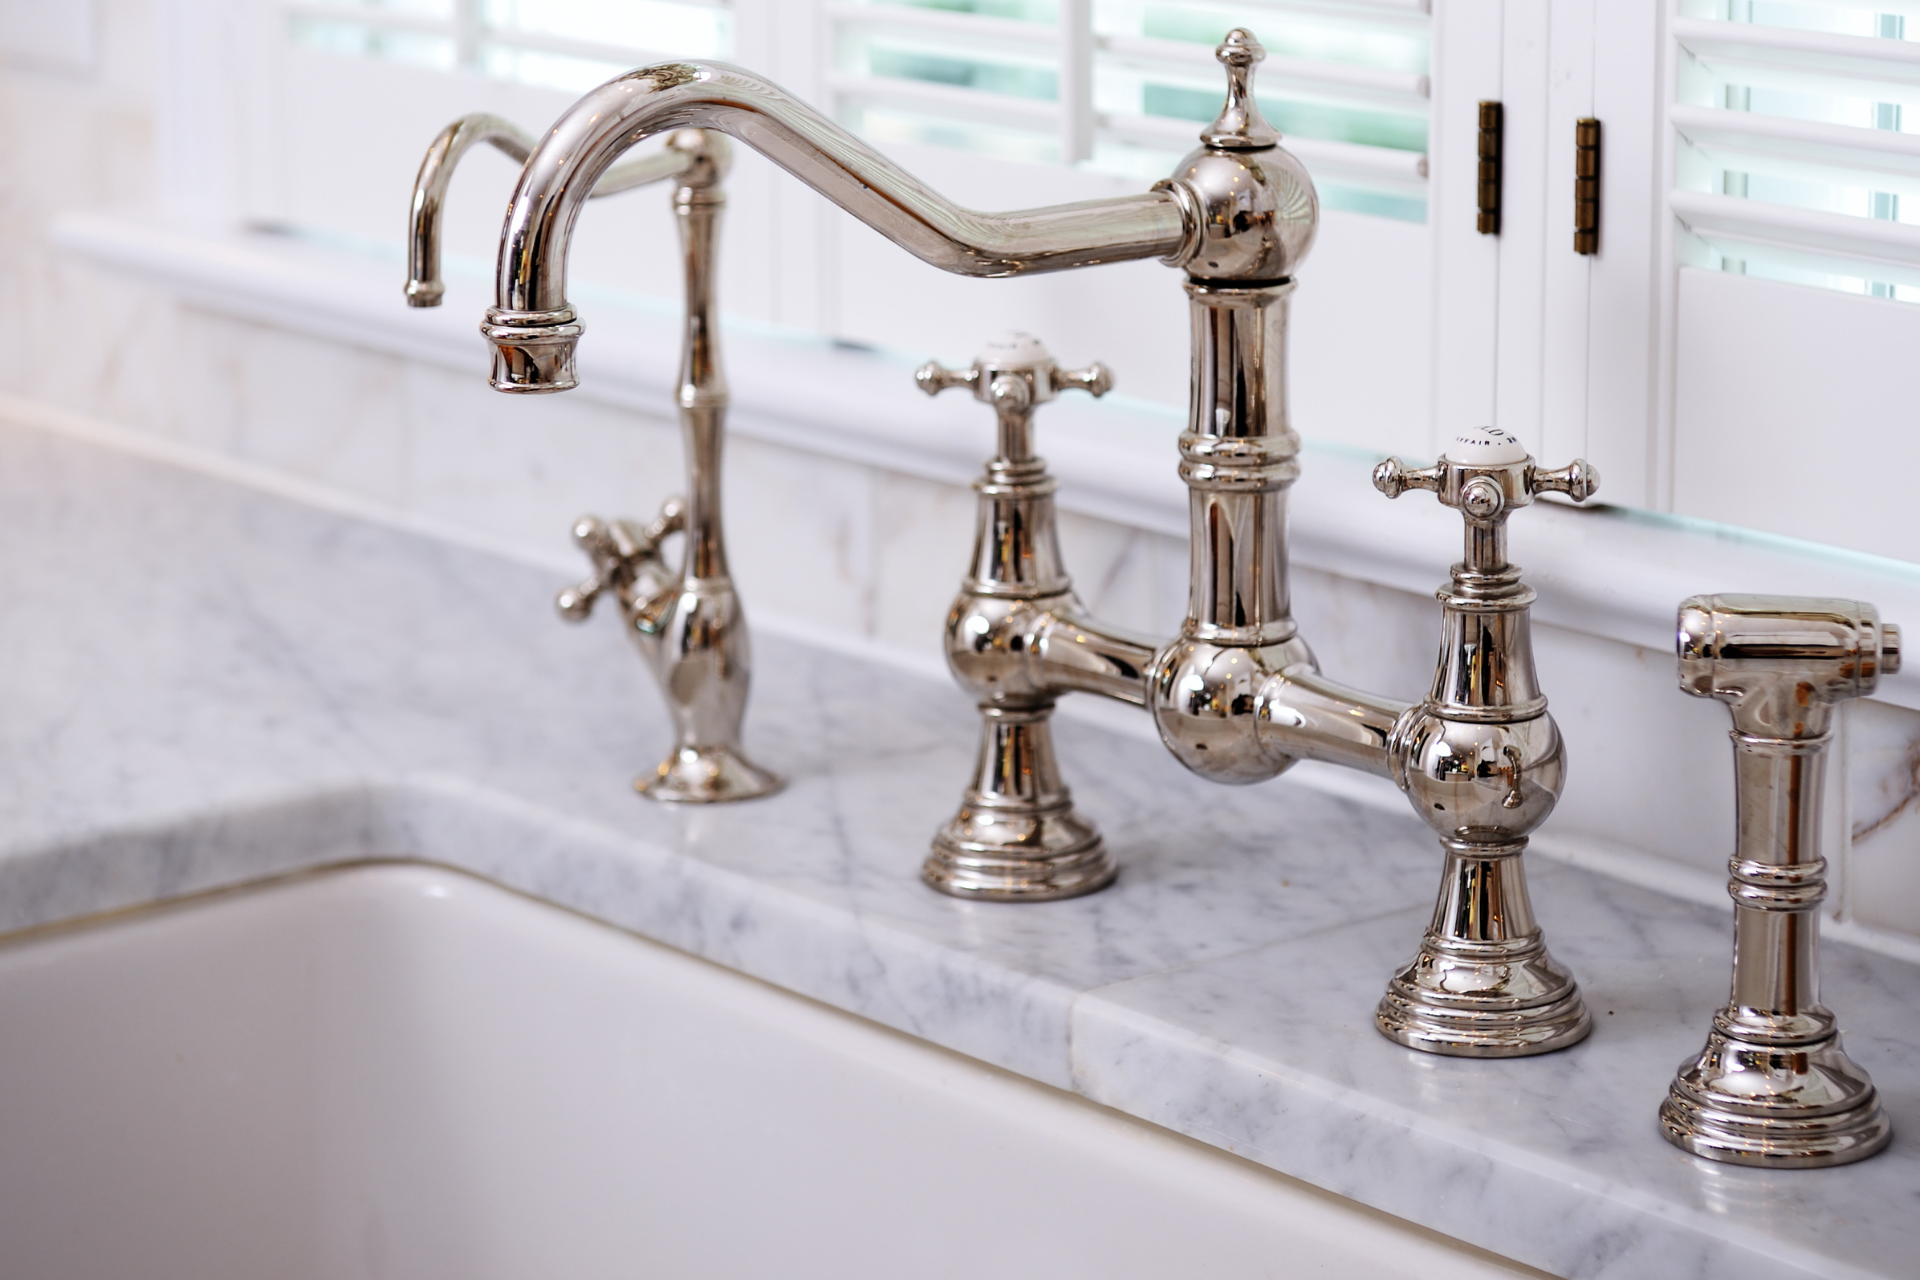 Brand new intricate kitchen faucet